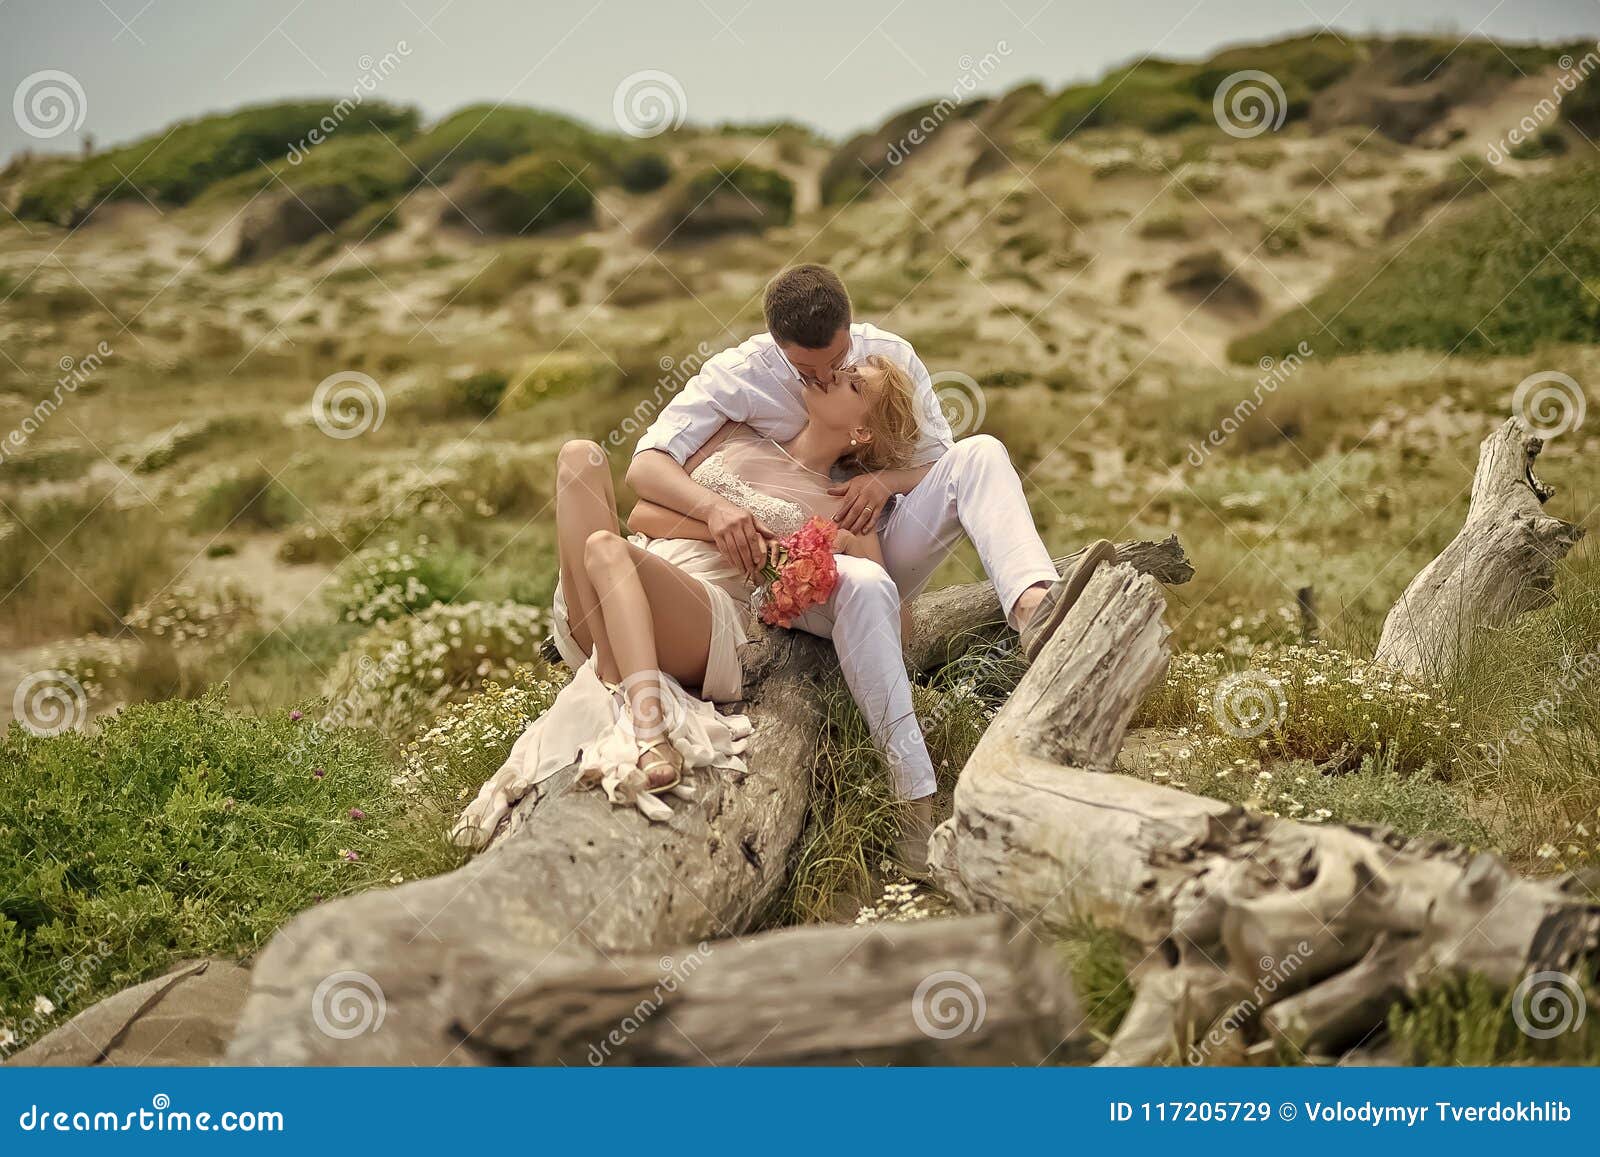 Having Sex with Hot Babe. Couple Lying Outdoor Stock Image - Image of  beauty, lovely: 117205729